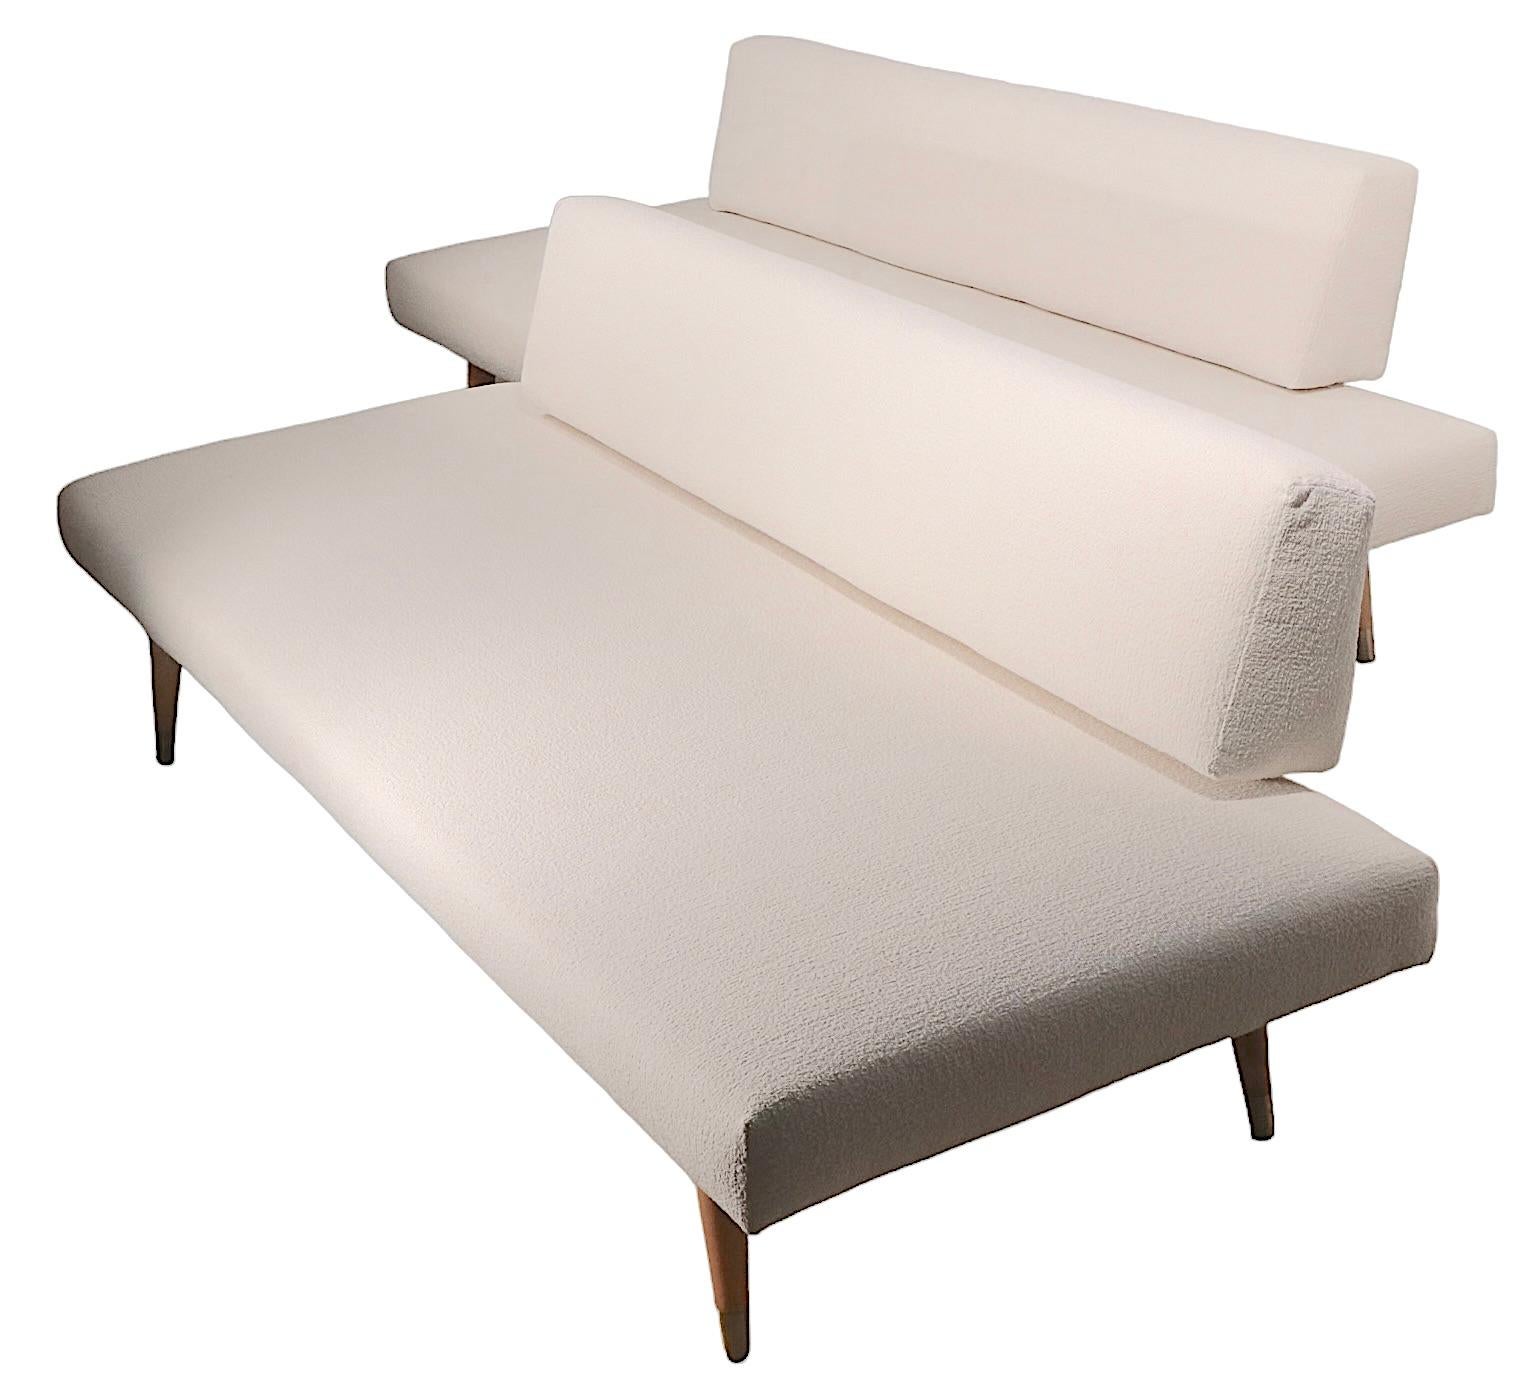 Pr. Mid Century Daybeds Newly Upholstered in Off White Boucle Fabric, c. 1950's 2